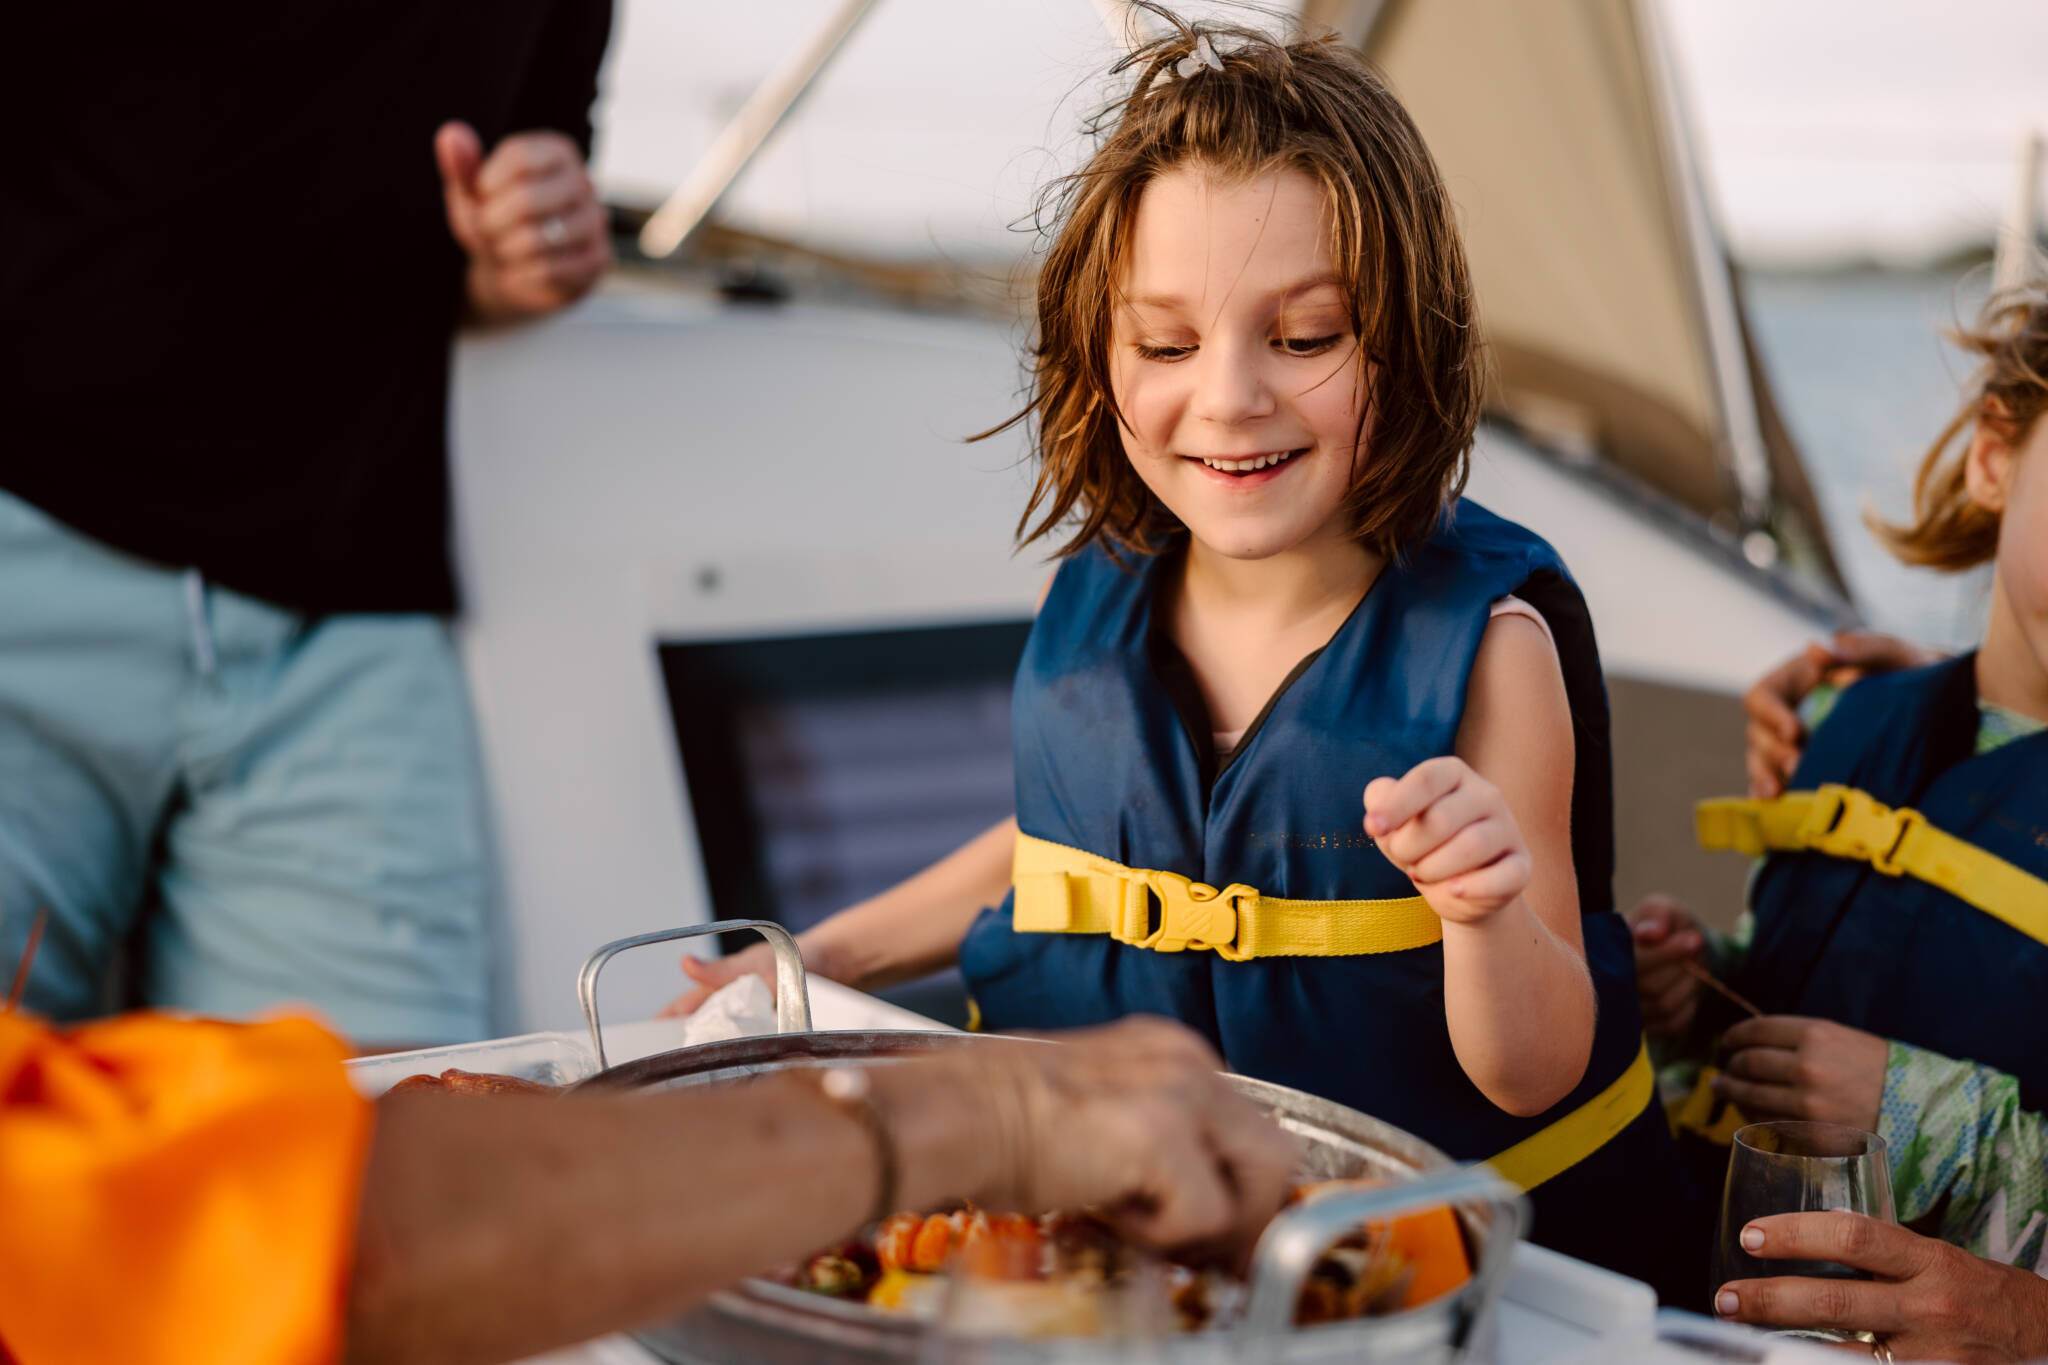 St Augustine Sailing - Family Friendly - Charcuterie - Foodie - Smiles - Fun on the boat